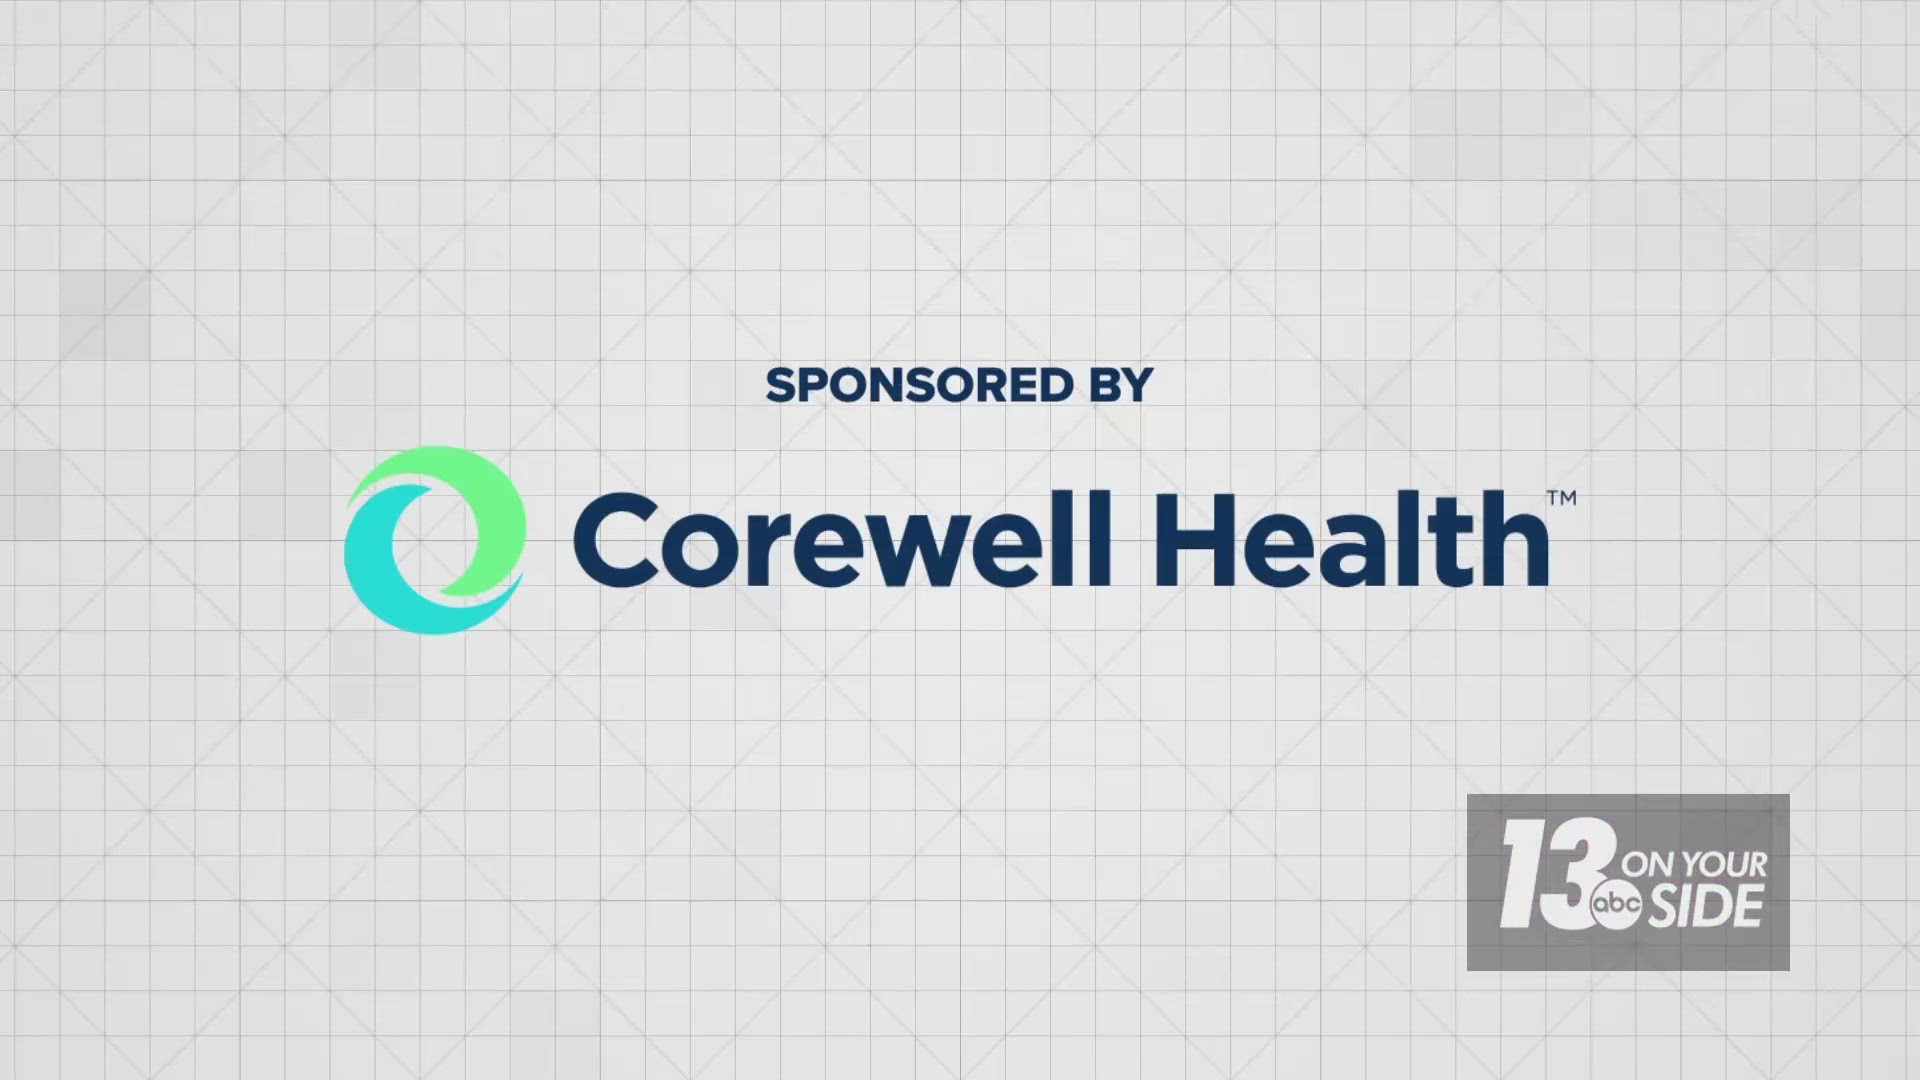 Corewell Health is offering free venous screenings at the West Michigan Women’s Expo, March 17-19 at DeVos Place.